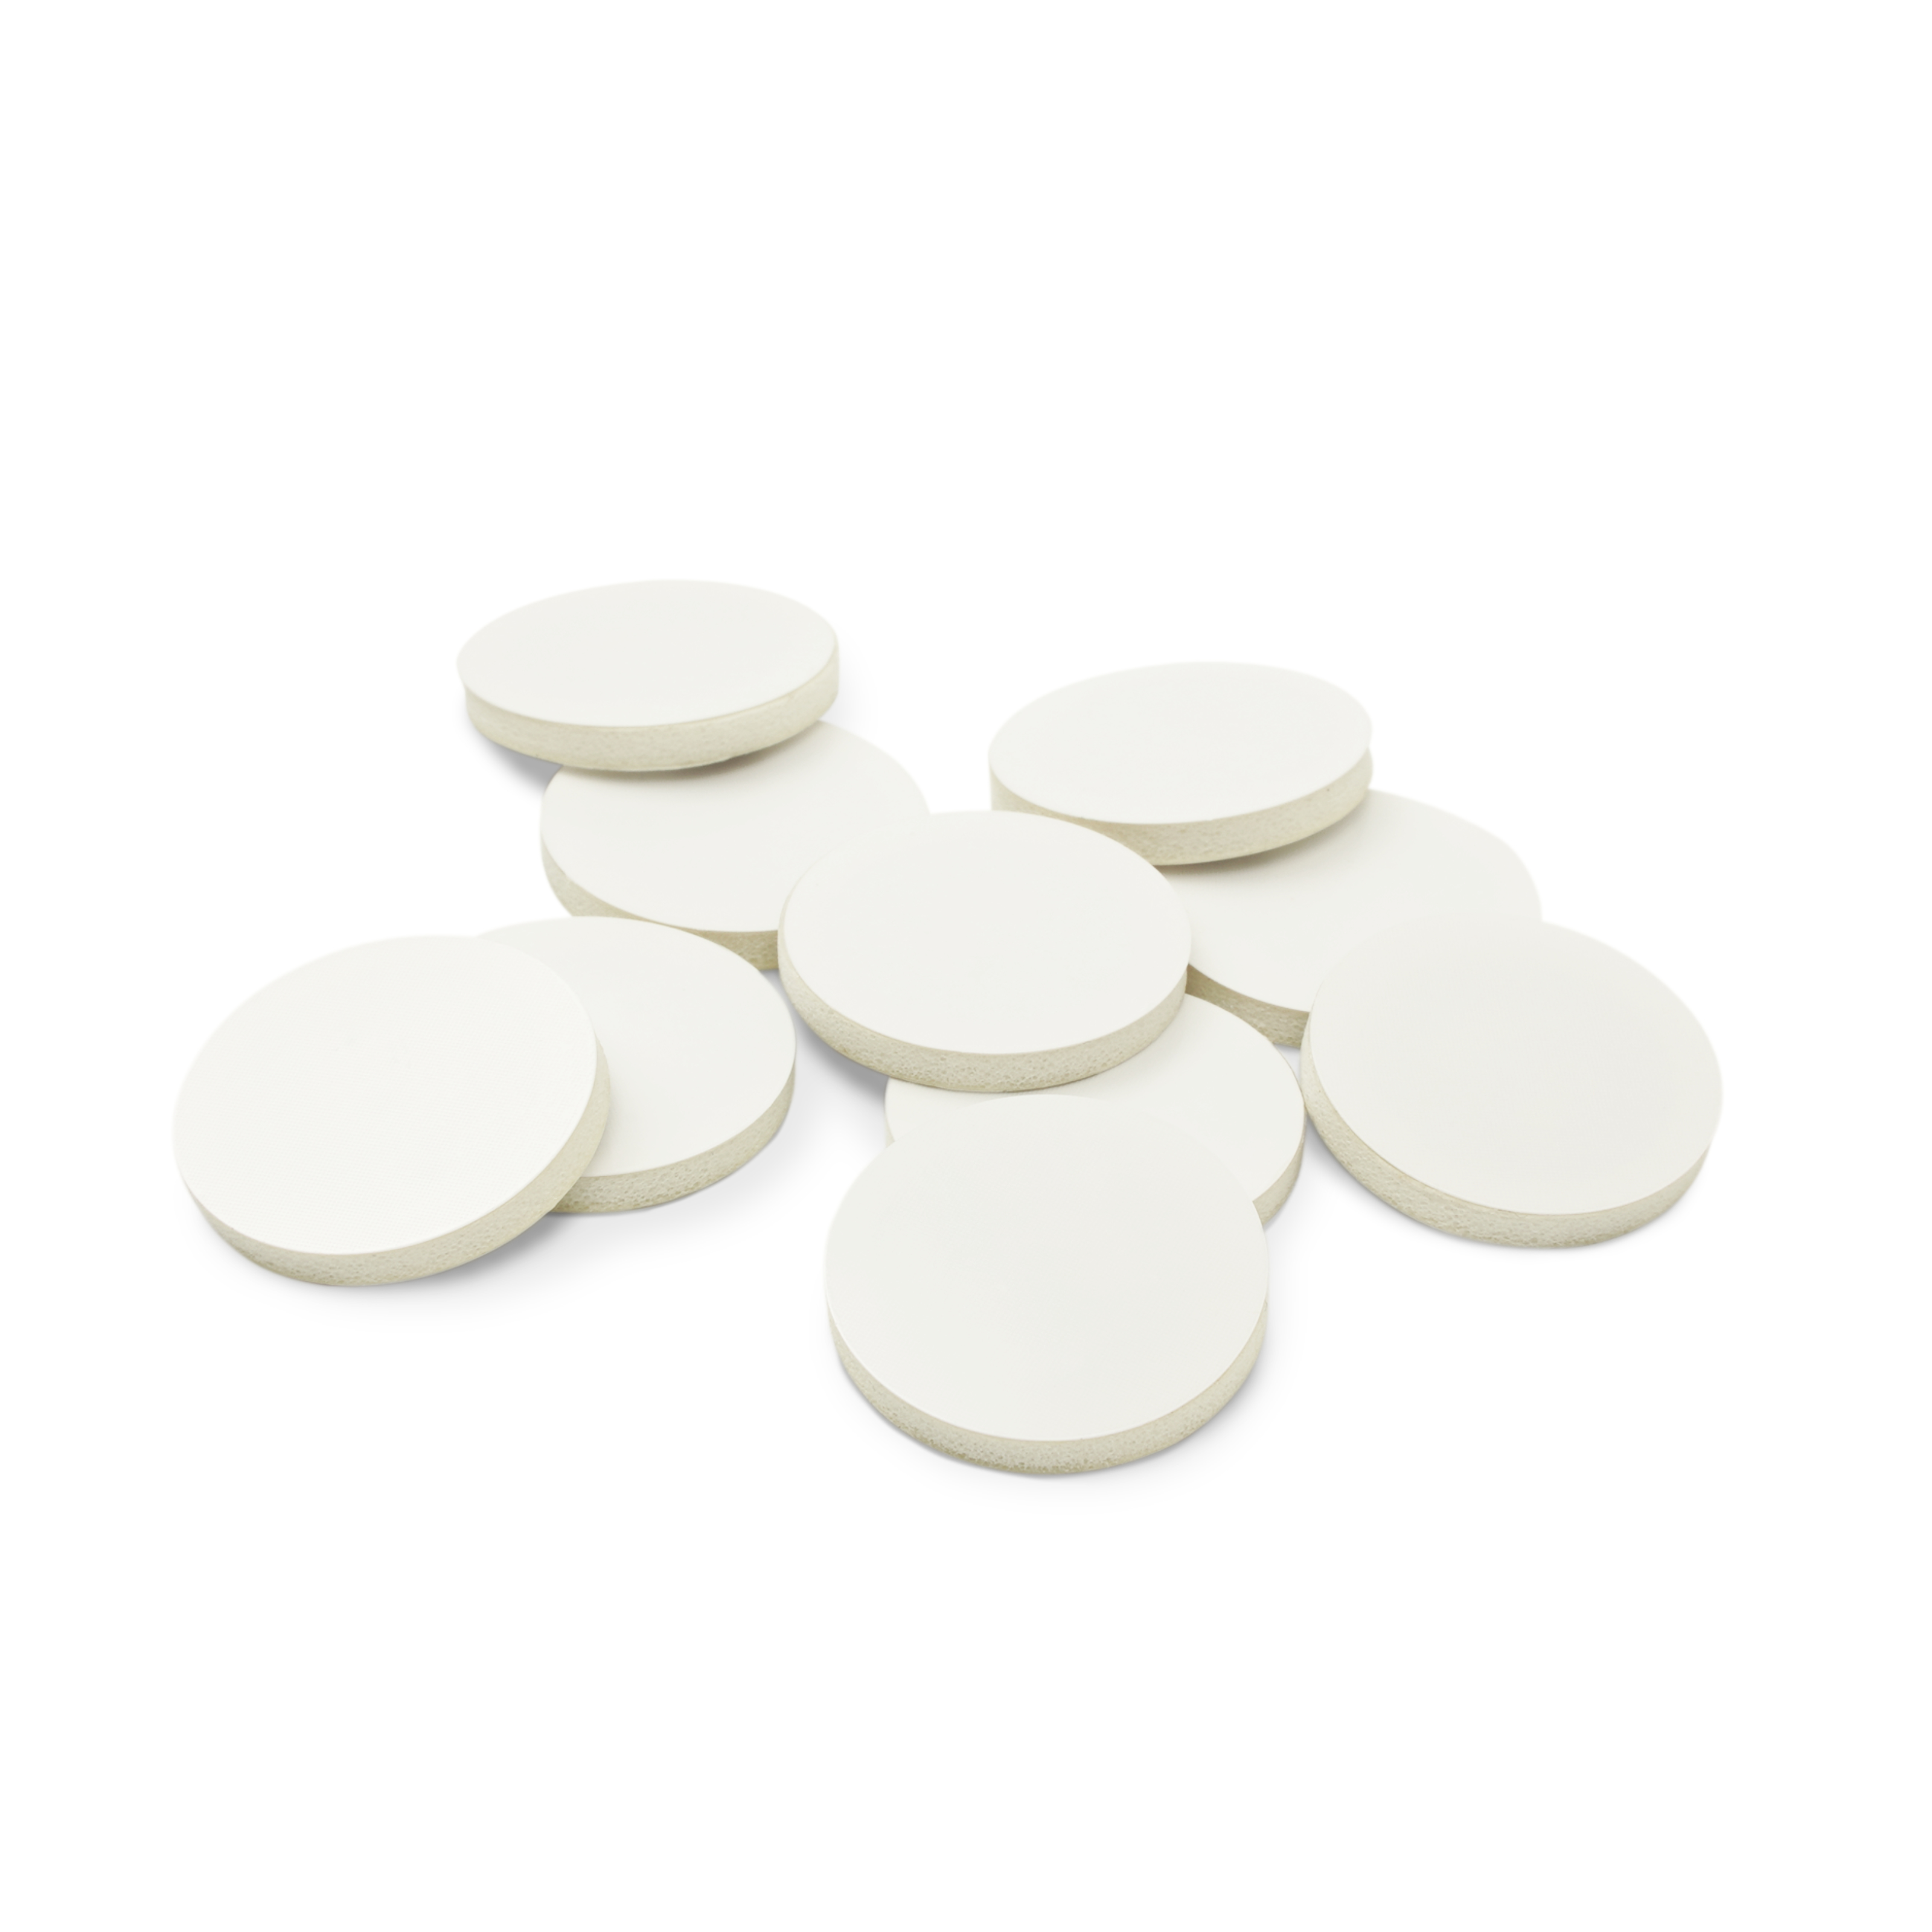 NFC Sticker PET - 30 mm - NTAG213 - 180 Byte - white - with foam